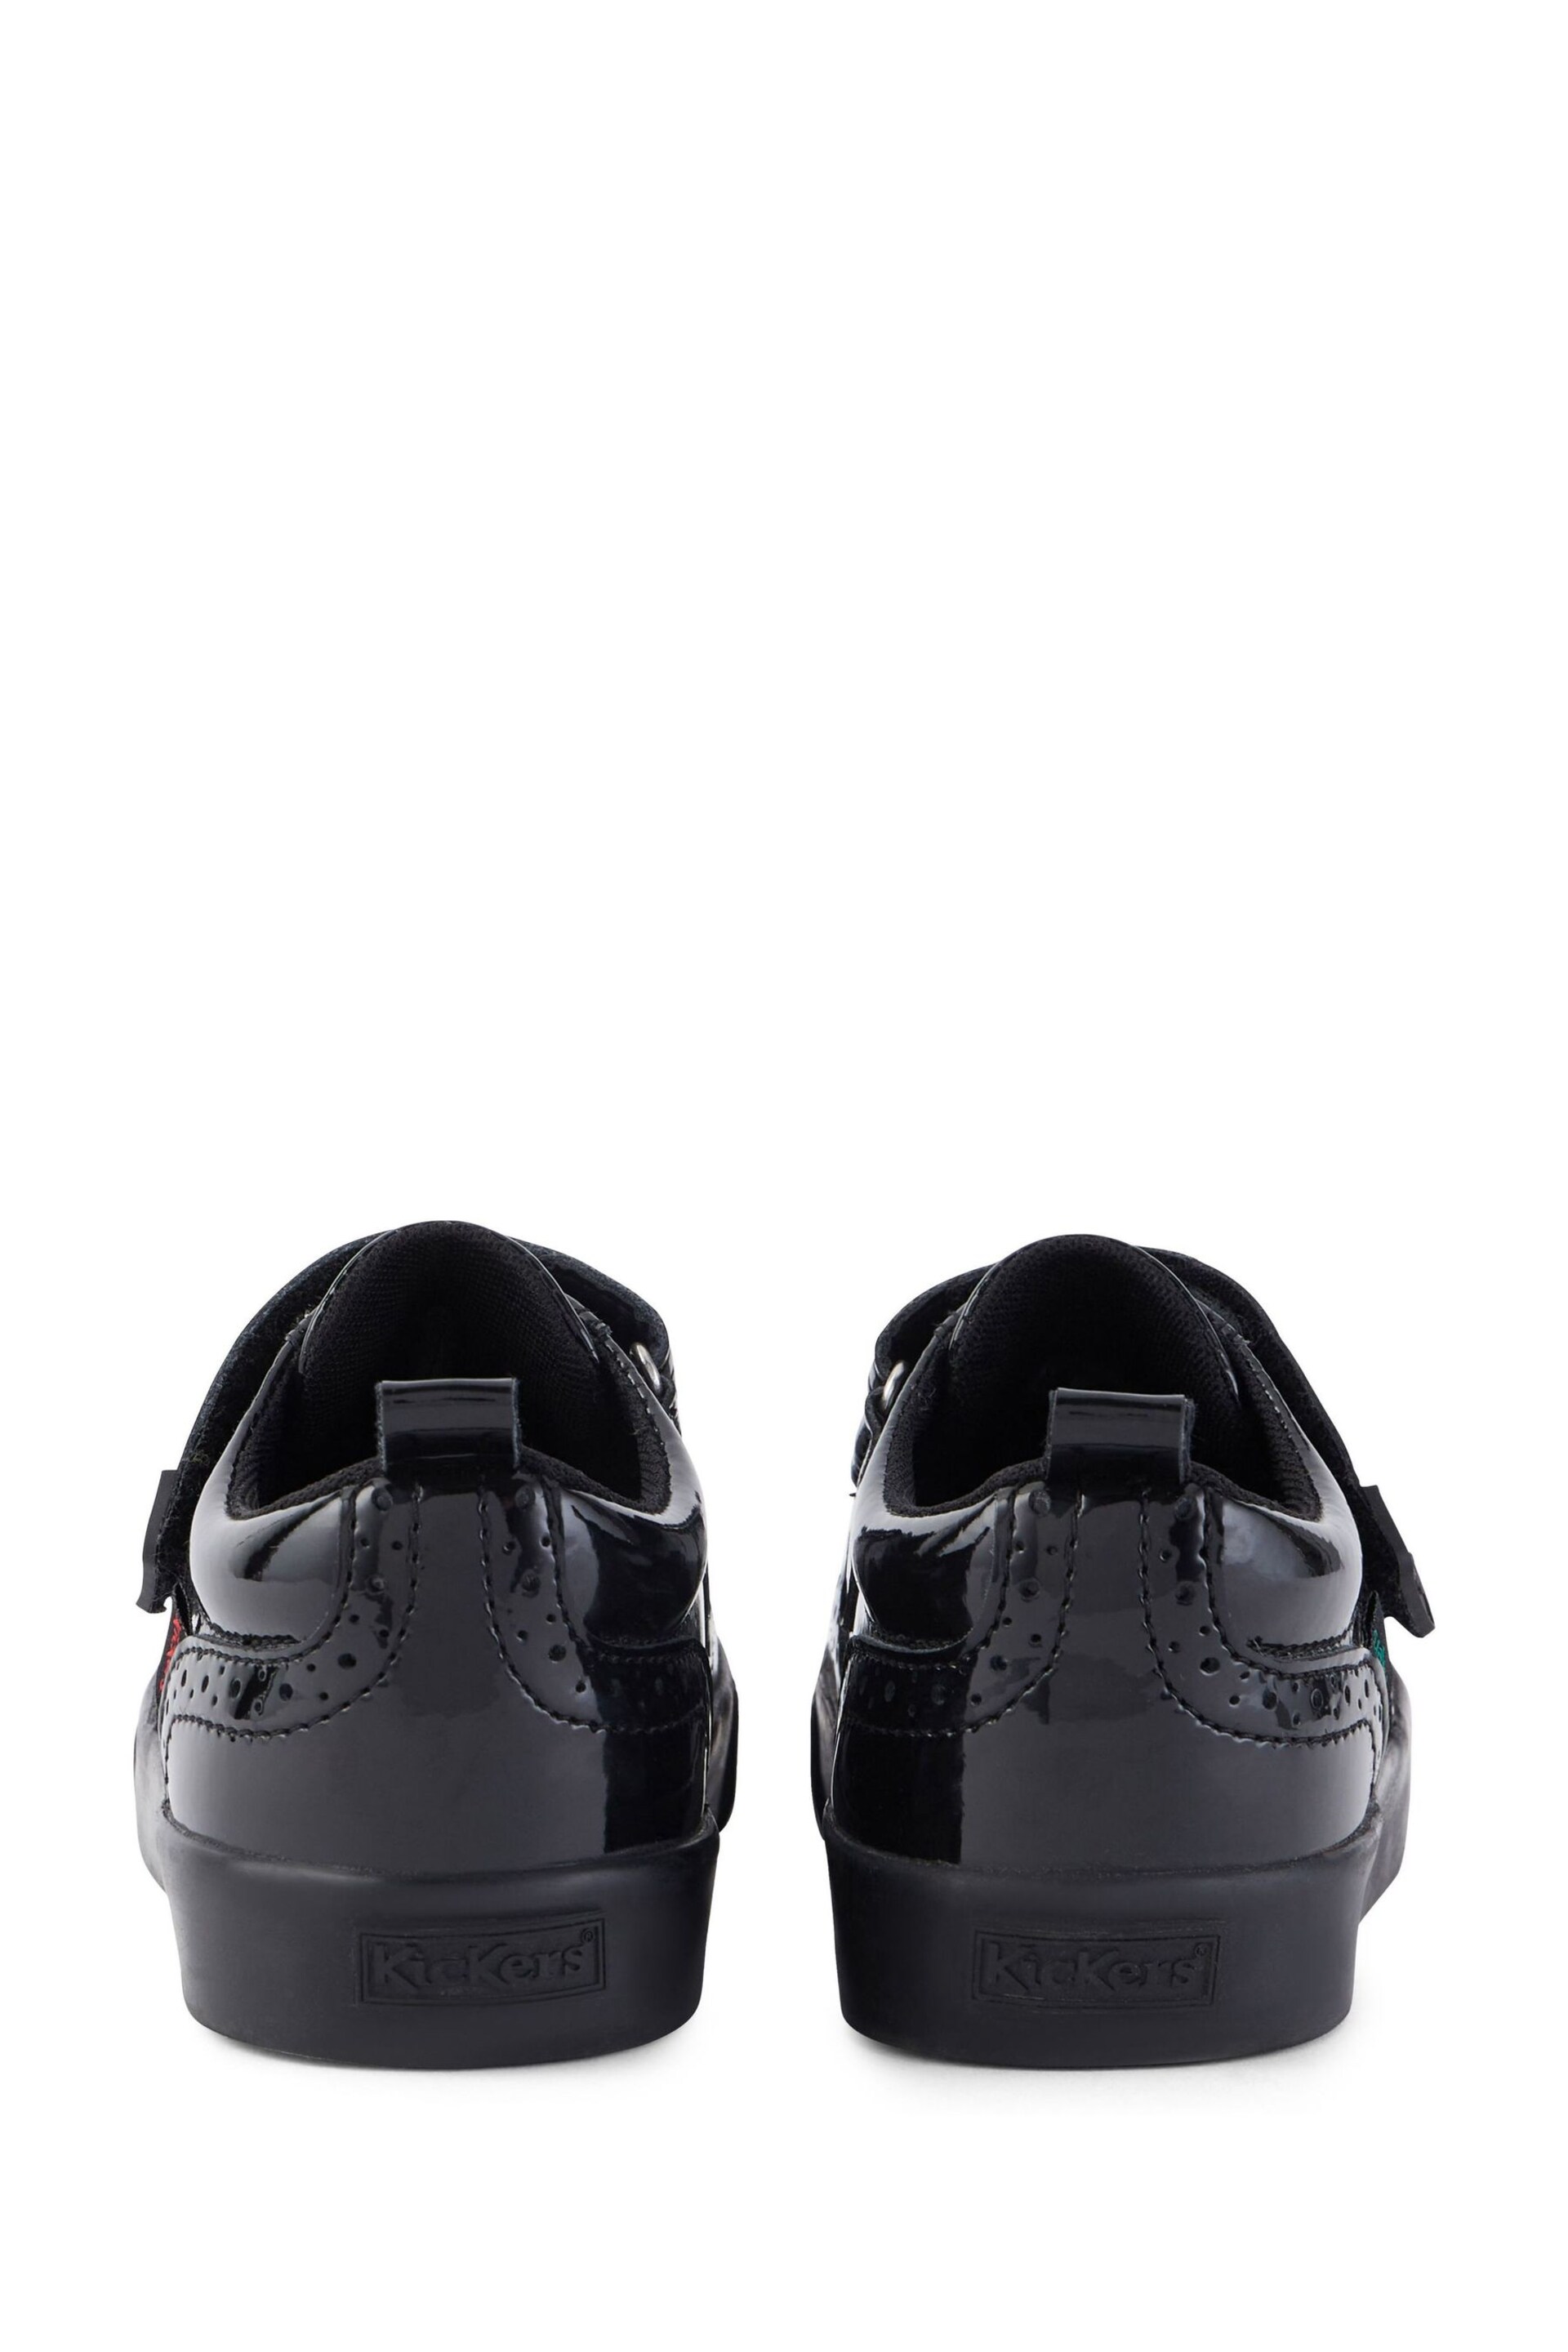 Kickers Junior Tovni Brogue Patent Leather Shoes - Image 4 of 6